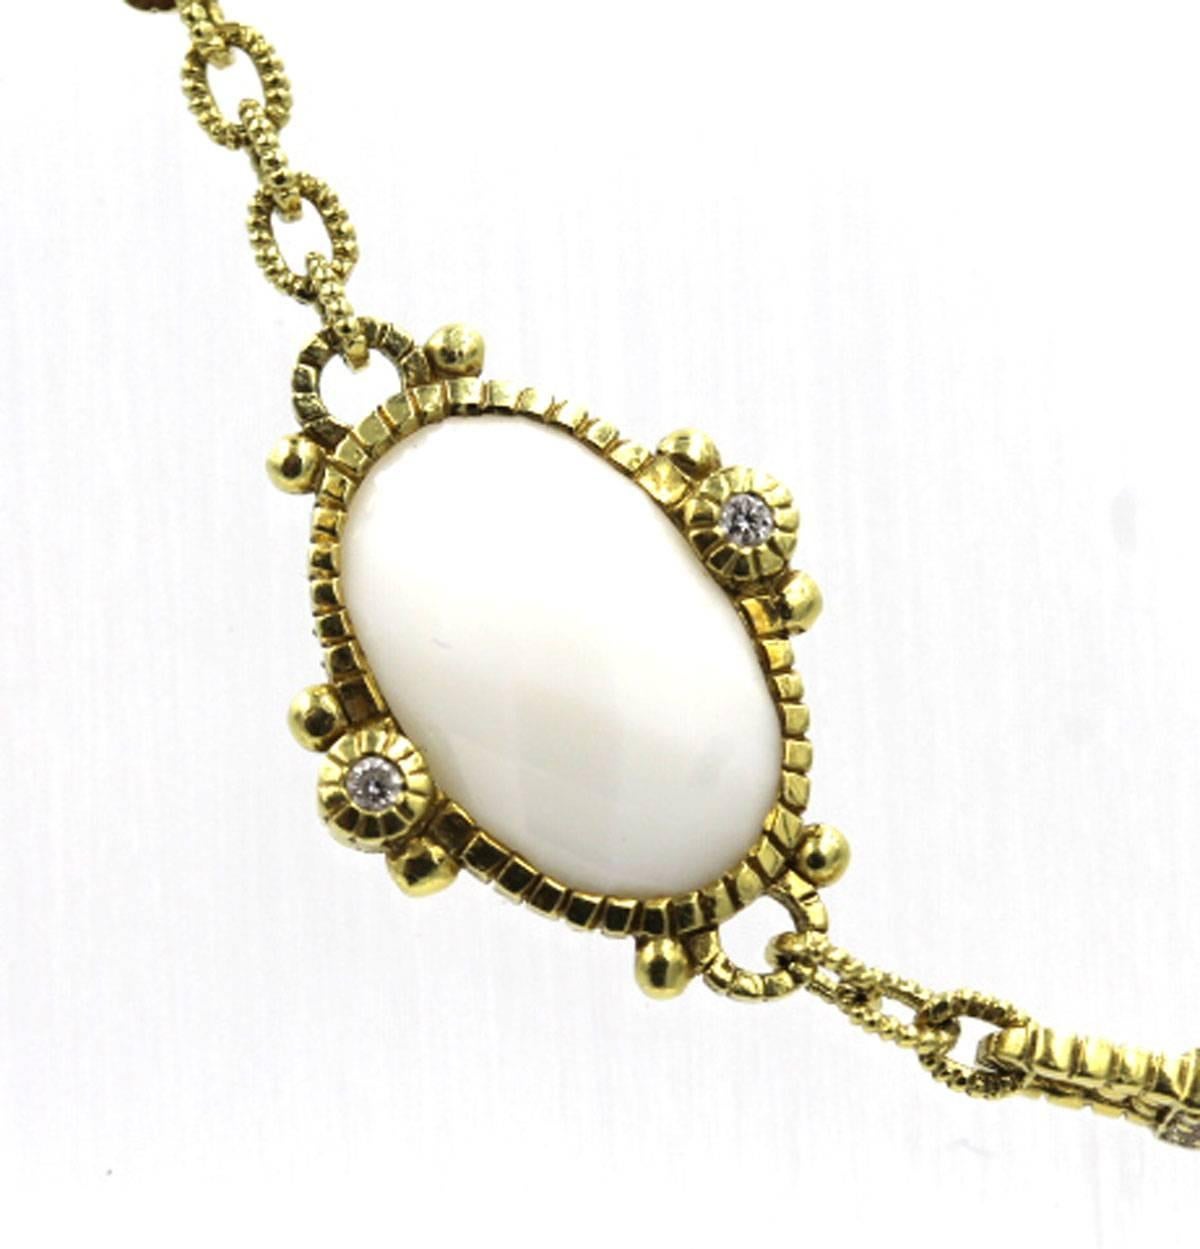 Designer necklace by Judith Ripka features 1/3 carat total weight of diamonds, and white agate set in 18 karat yellow gold. The 17 inch necklace is signed Judith Ripka, and retails for approximately $5,800.
